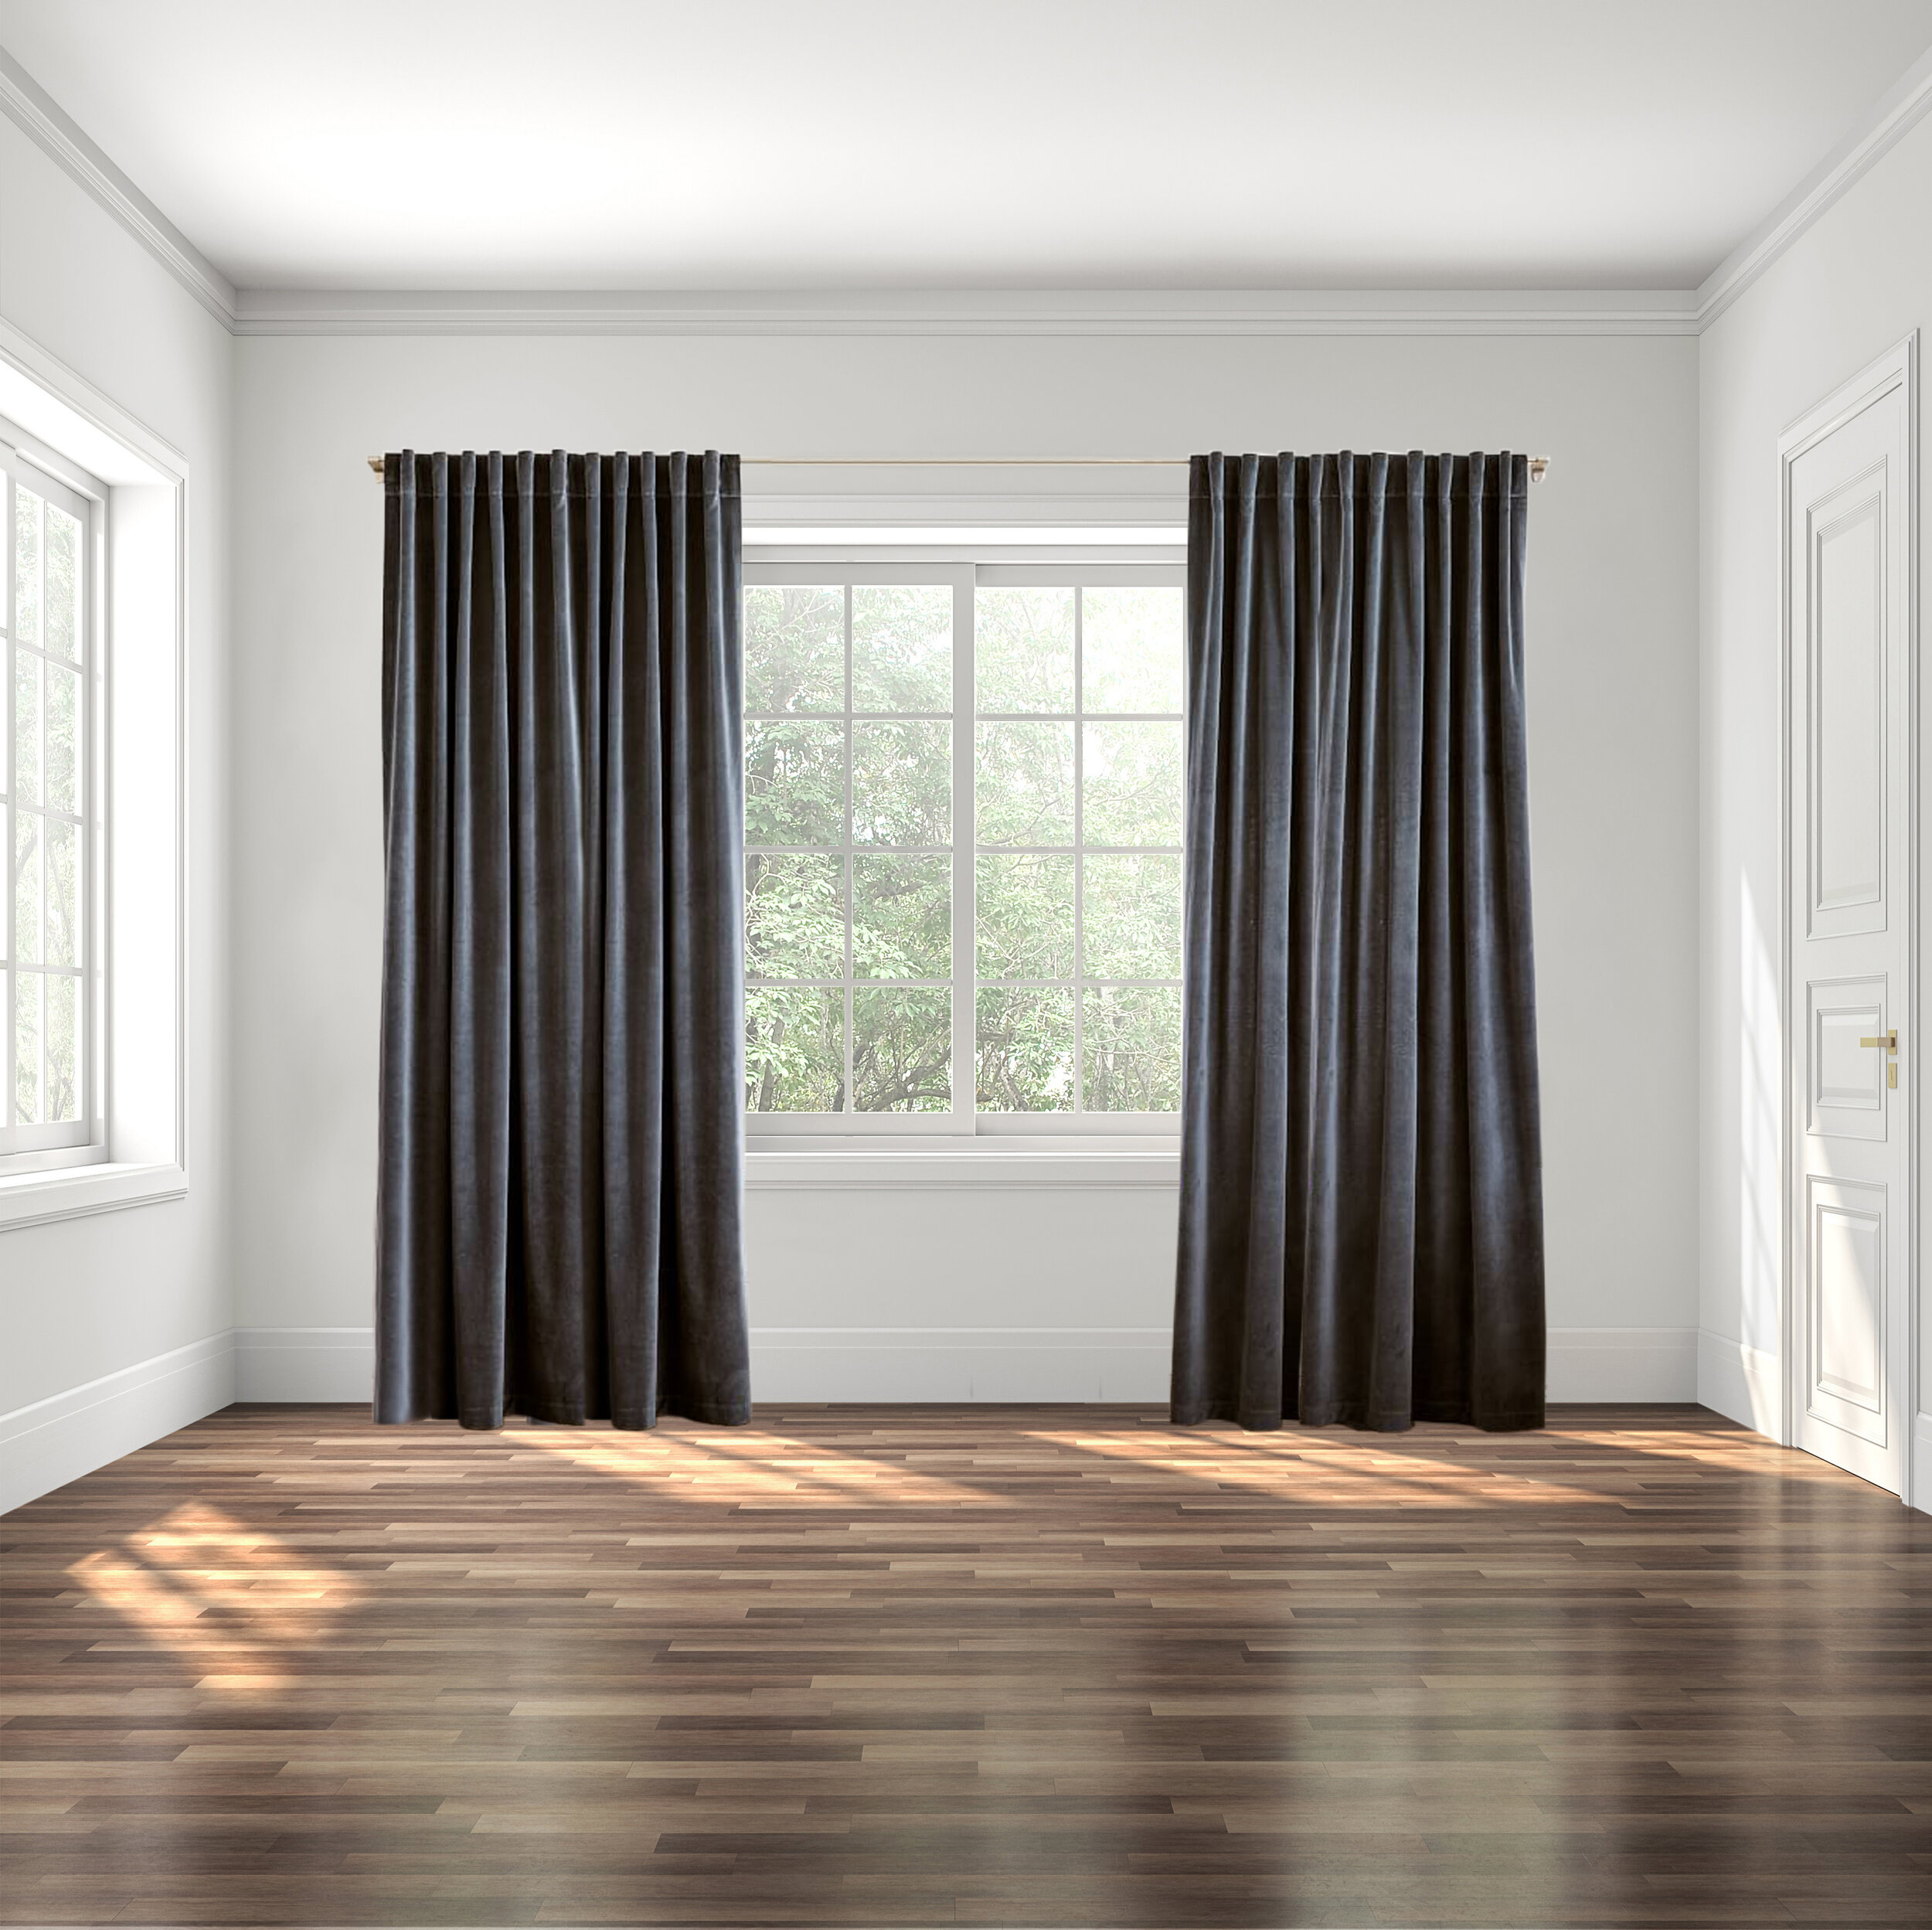 https://images.squarespace-cdn.com/content/v1/58058acc5016e176c8d090c4/1613665280967-N5BYM6BG1KT3L8U2LCLT/Curtain+Placement+Guide+by+Nadine+Stay+%7C+Curtain+placement+do%27s+and+don%27ts.+How+high+to+hang+your+curtain%2C+how+wide+to+place+the+rod%2C+how+long+of+curtains+you+should+get%2C+and+how+many+curtain+panels+I+recommend+per+window.+%7C+Nadine+Stay